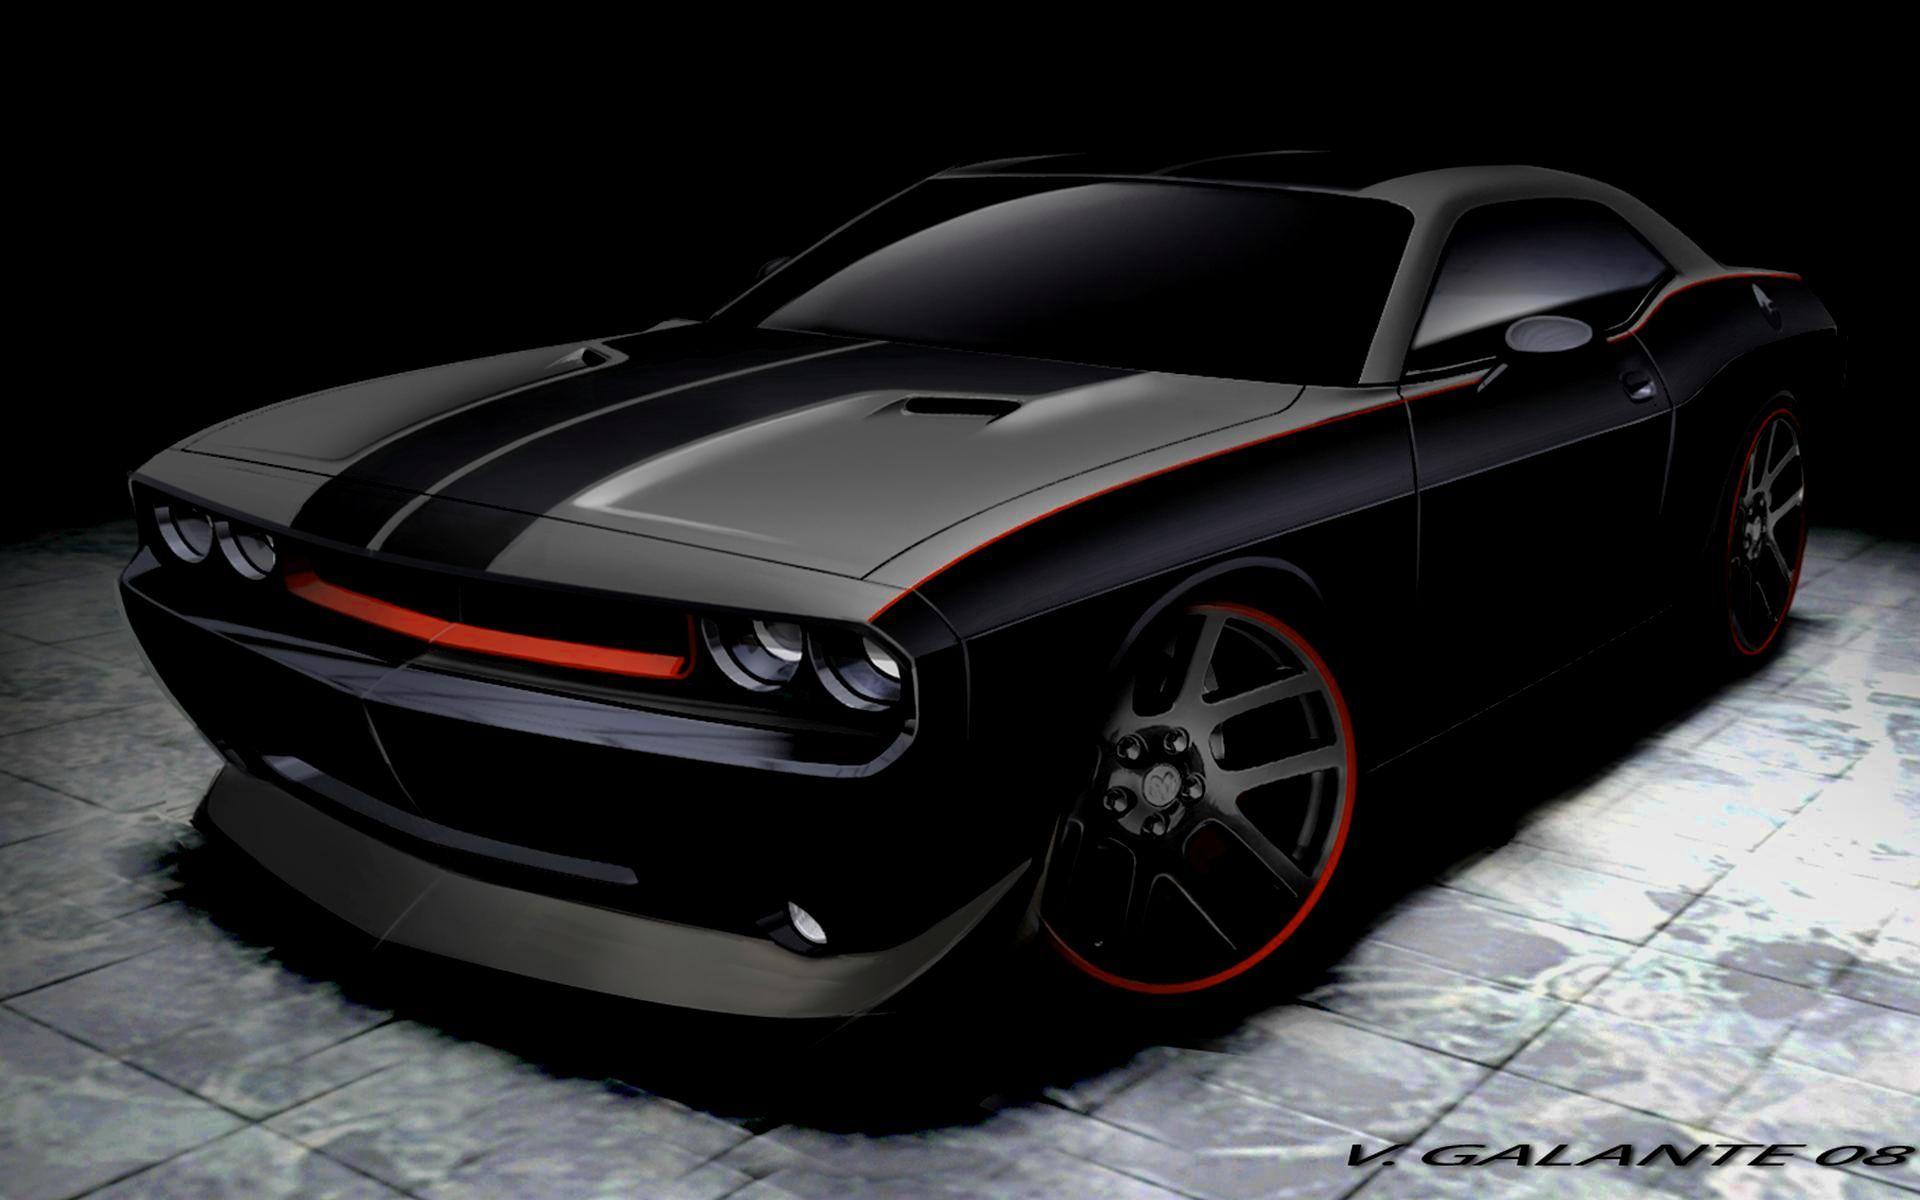 Dodge Car Wallpaper. tianyihengfeng. Free Download High Definition